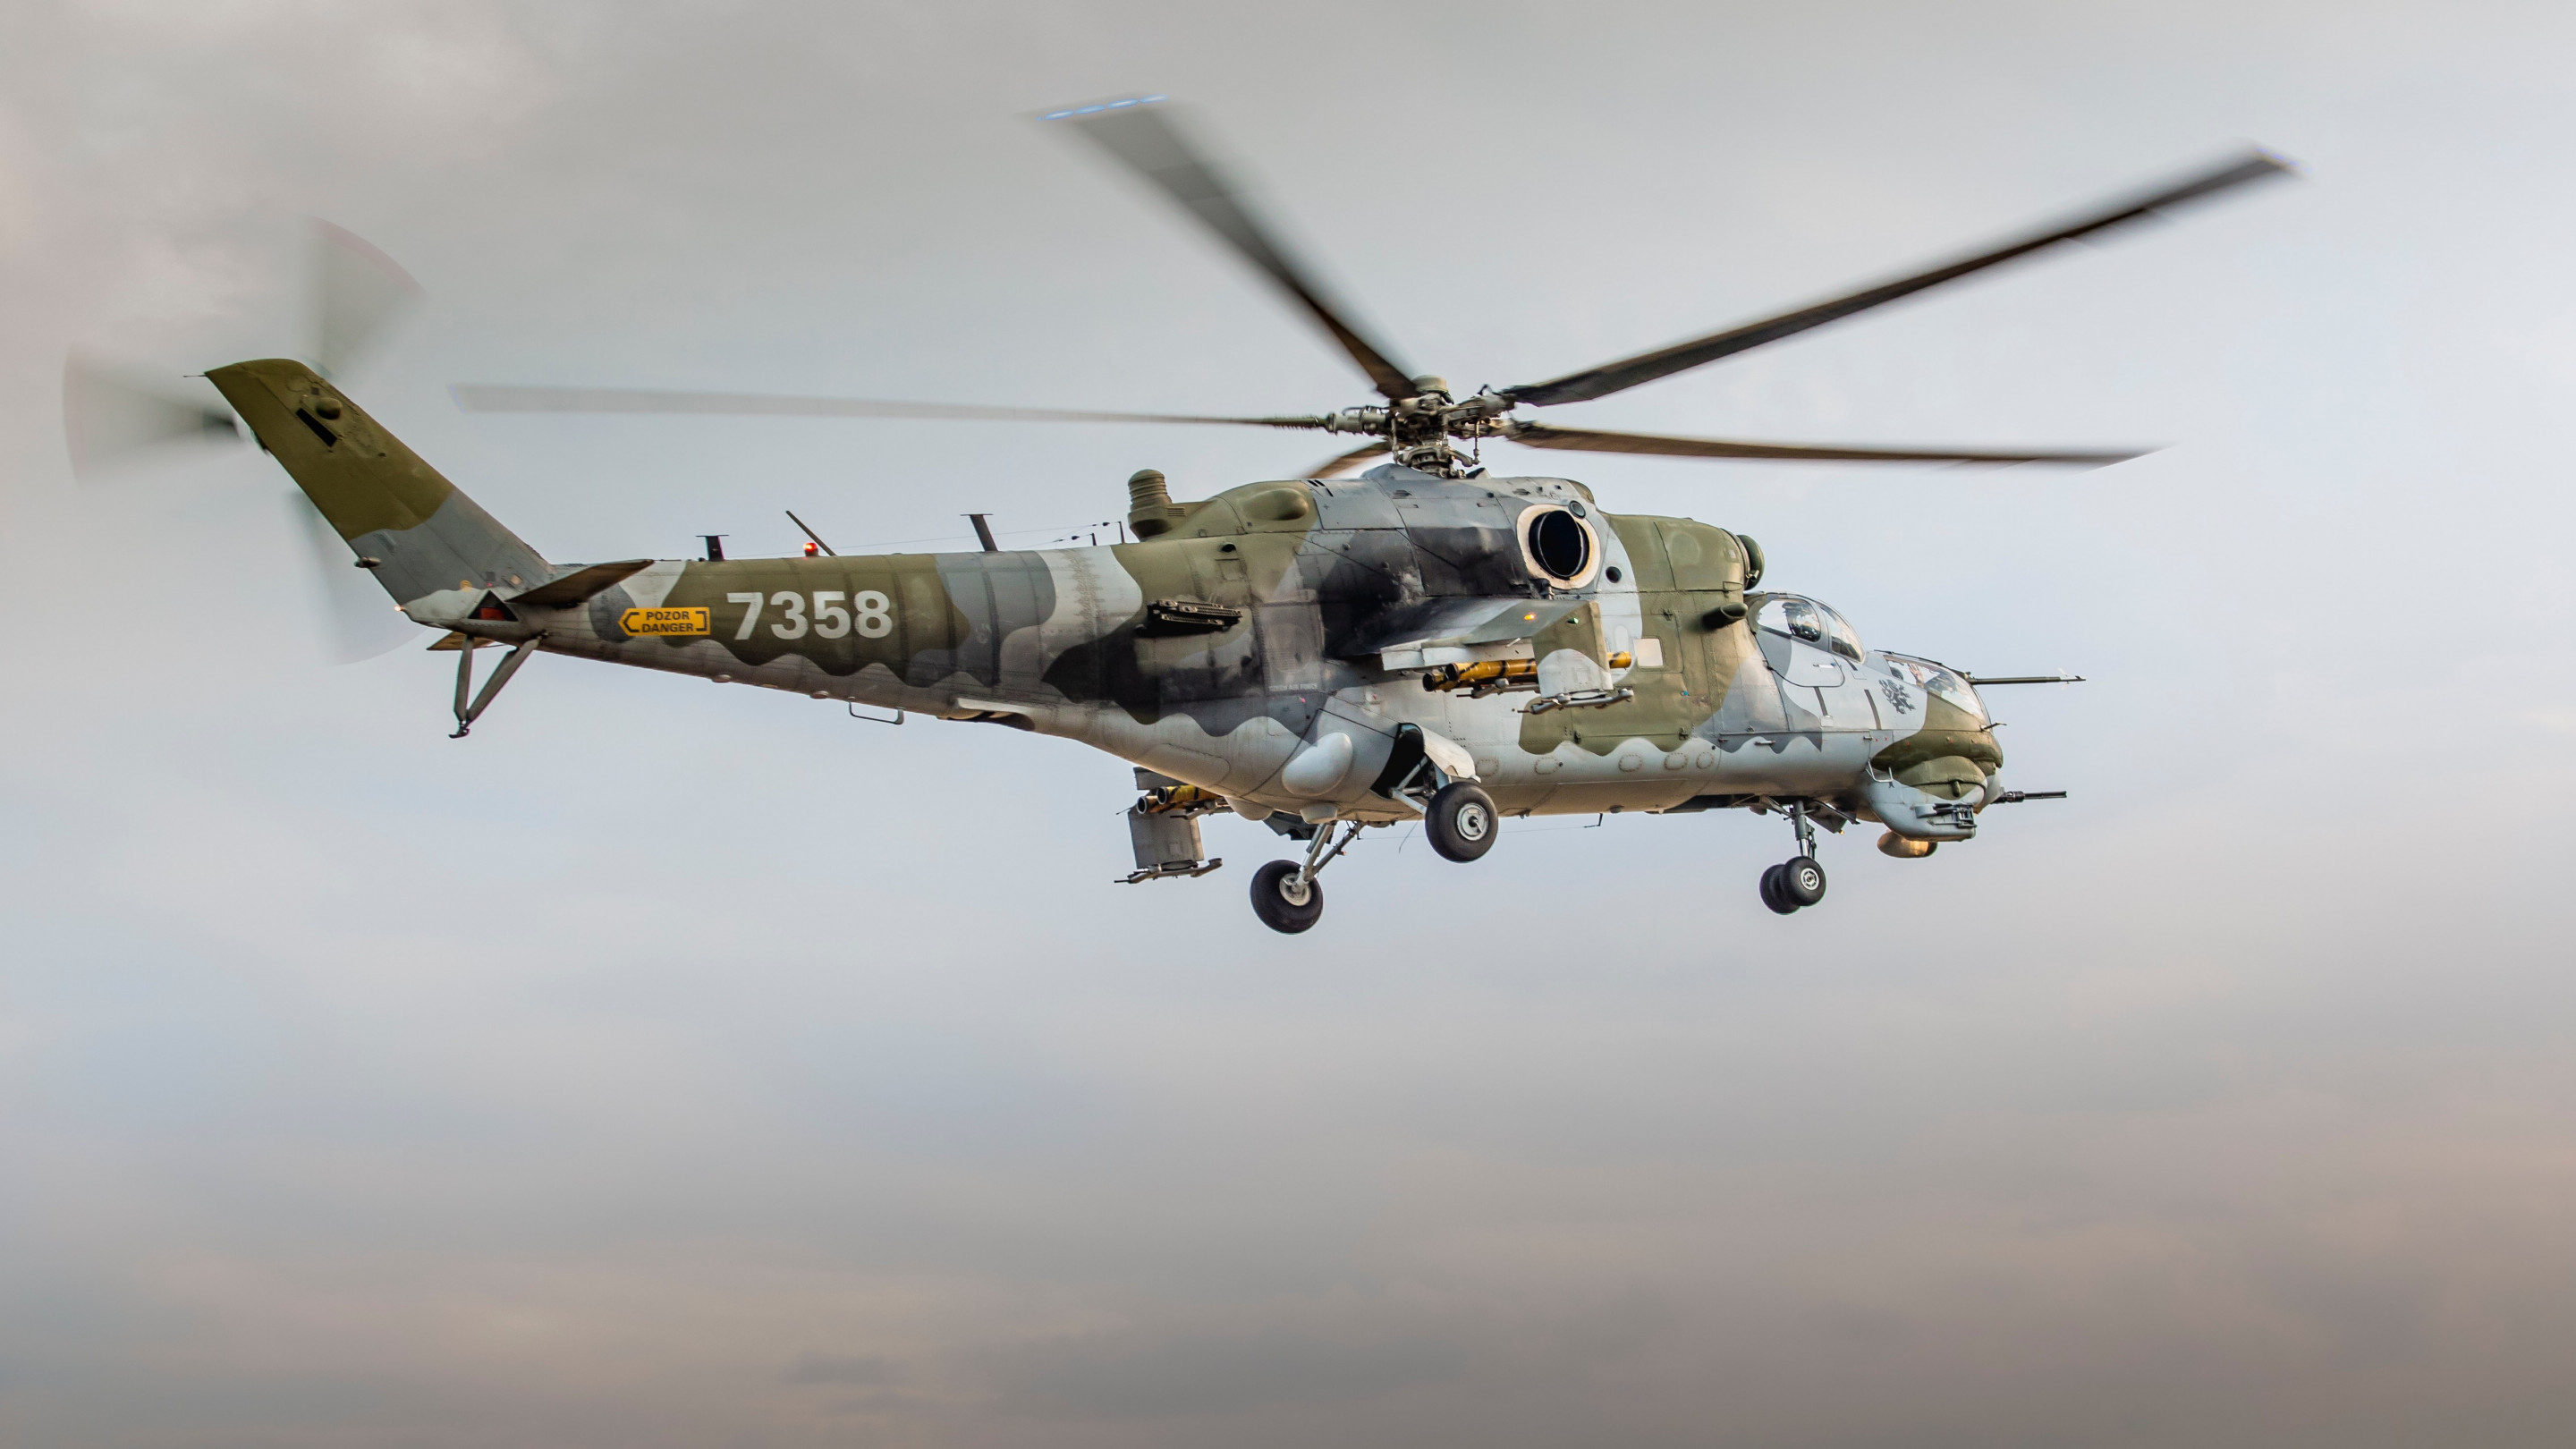 Military helicopter wallpaper 2880x1620